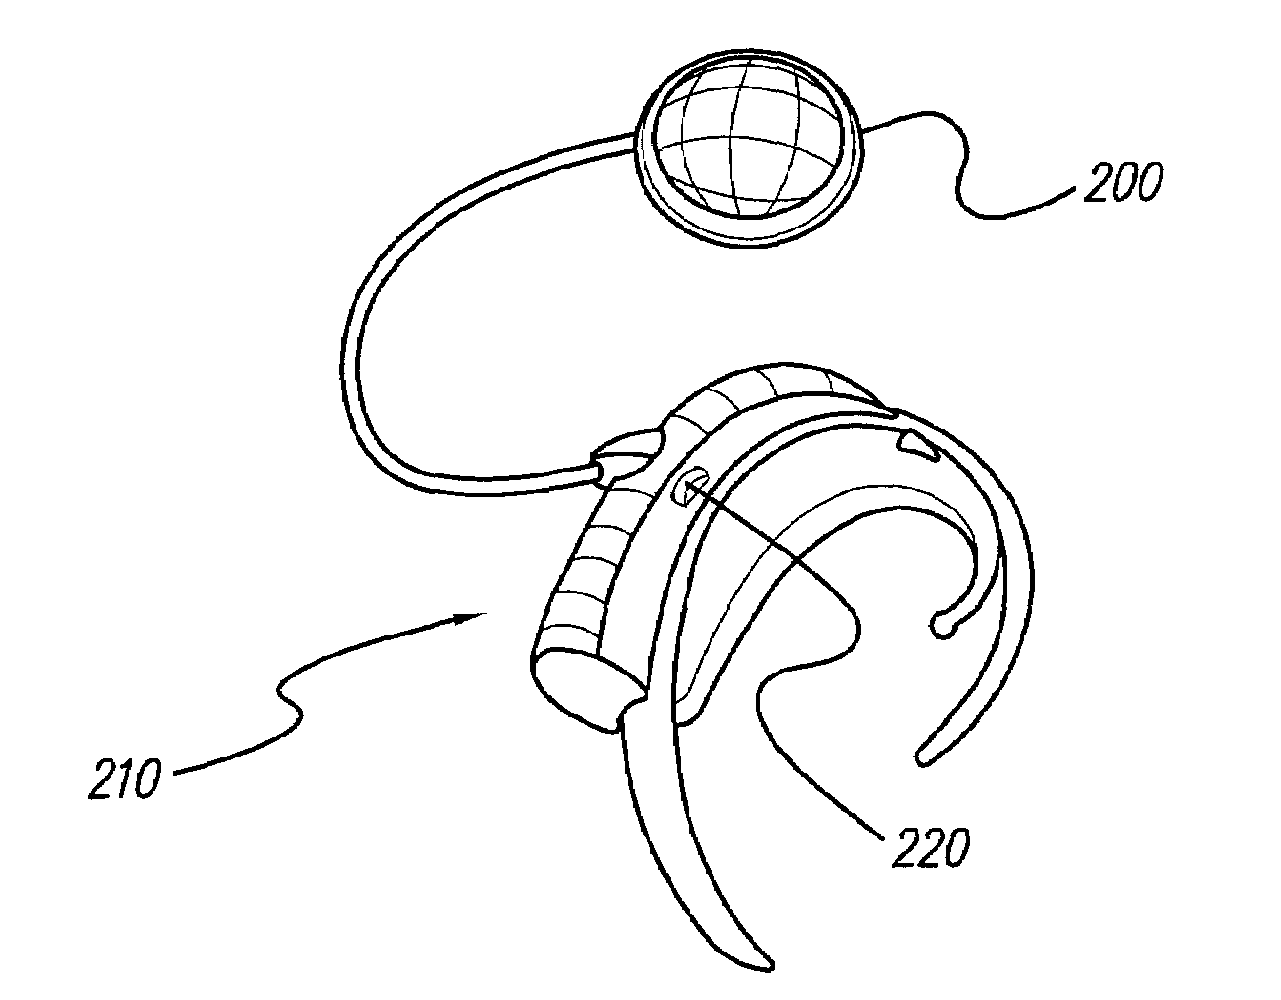 Shell for external components of hearing aid systems